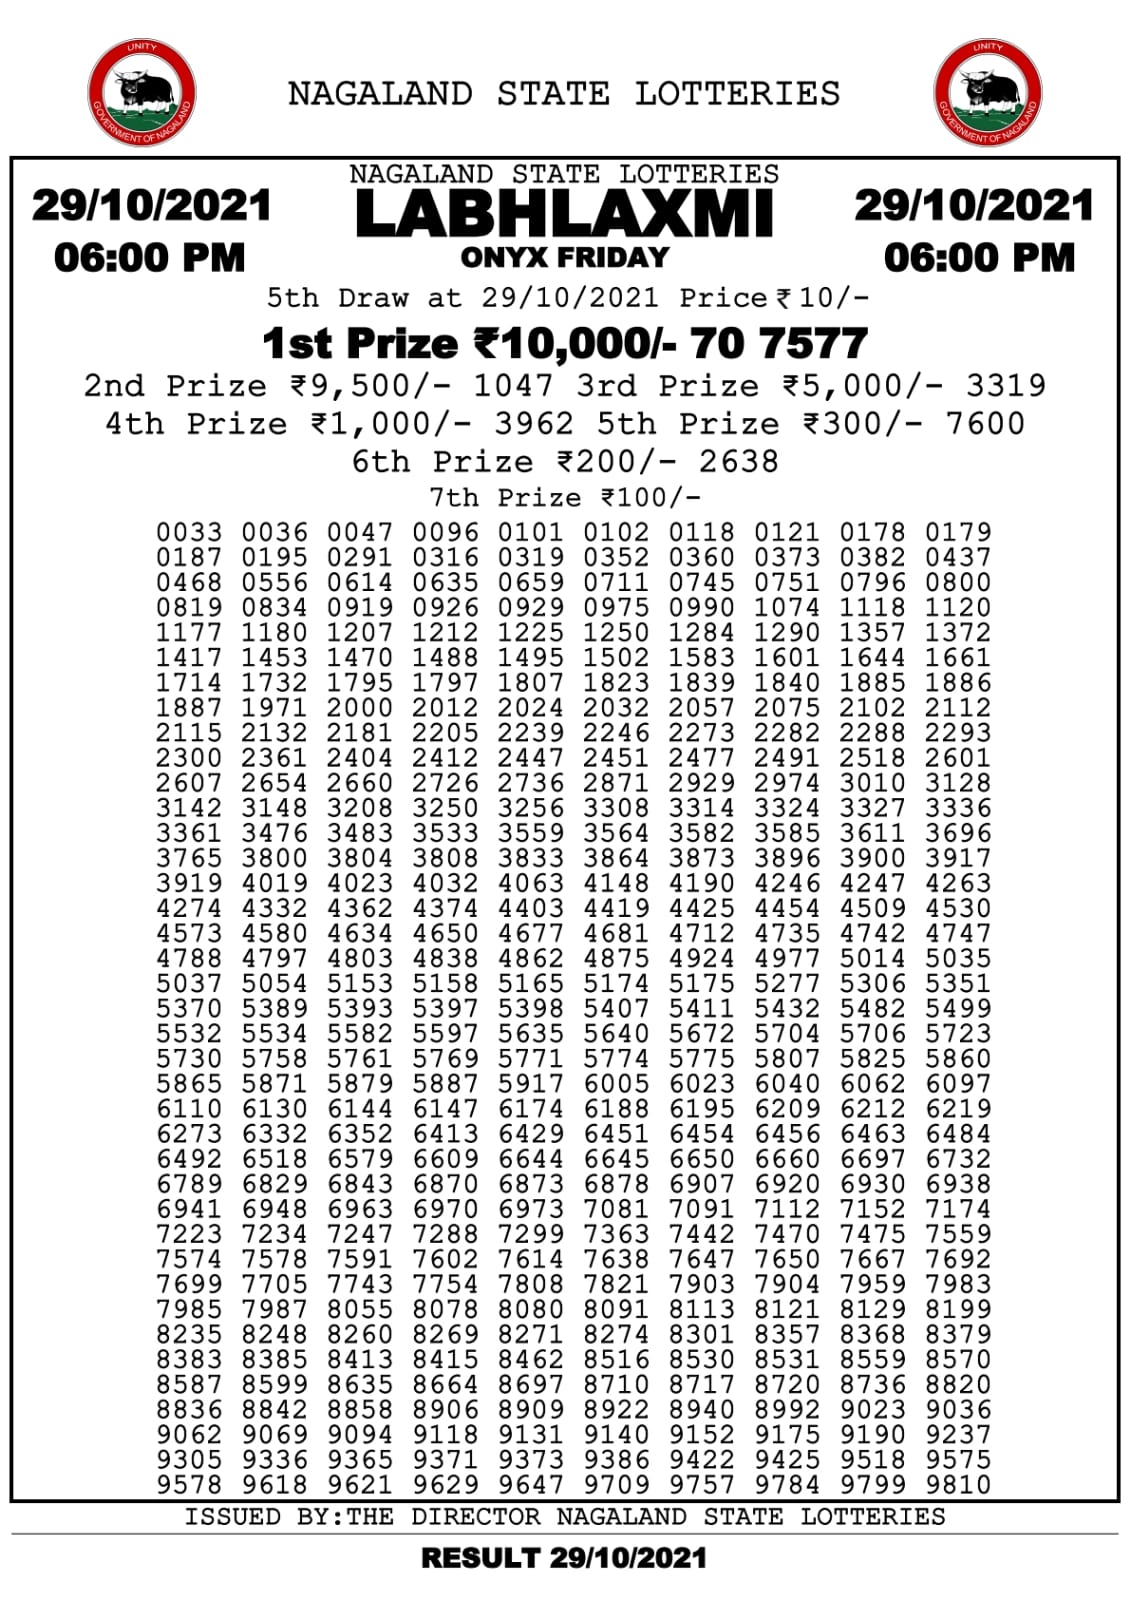 Labhlaxmi 6pm Lottery Result 29.10.2021